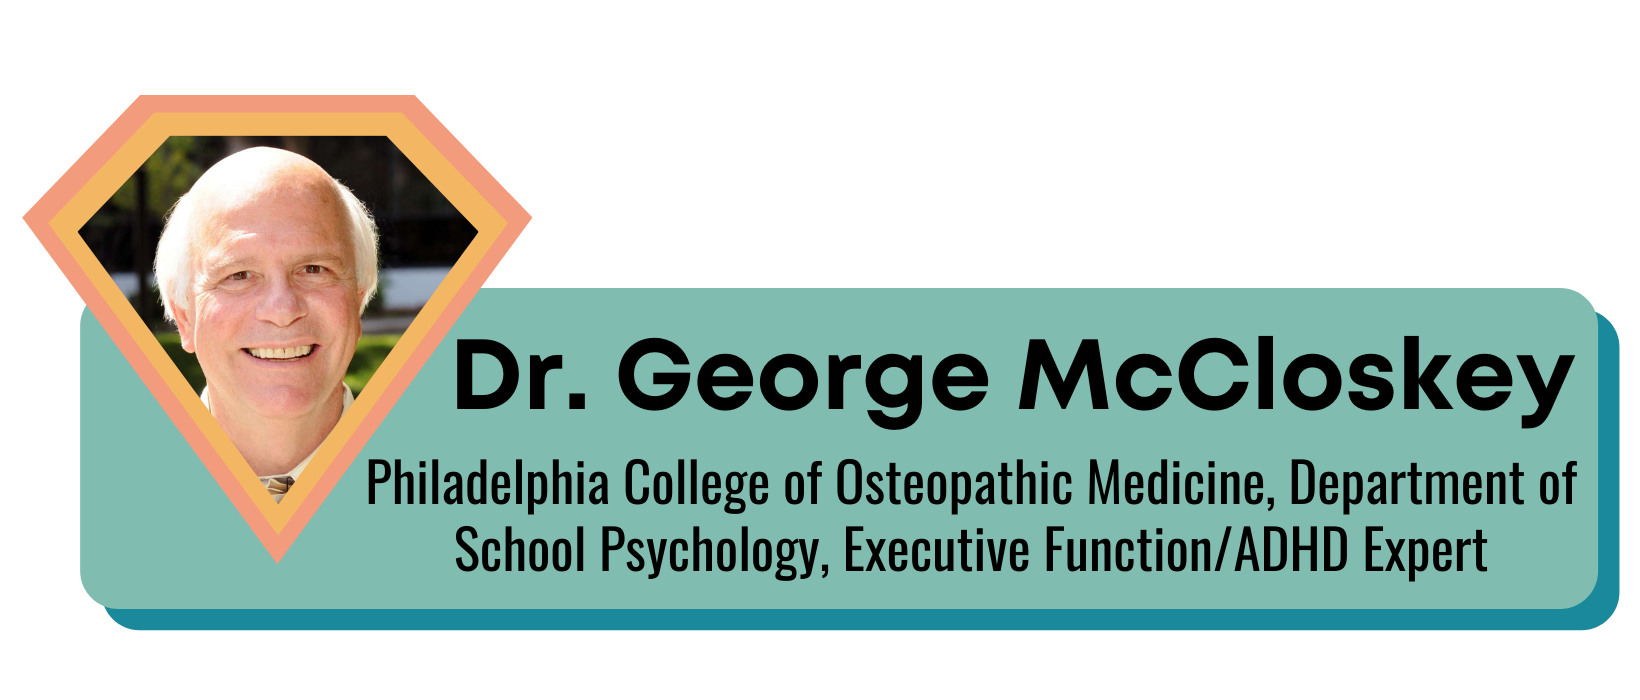 Dr. George McCloskey, Philadelphia College of Osteopathic Medicine, Department of School Psychology, Executive Function/ADHD Expert